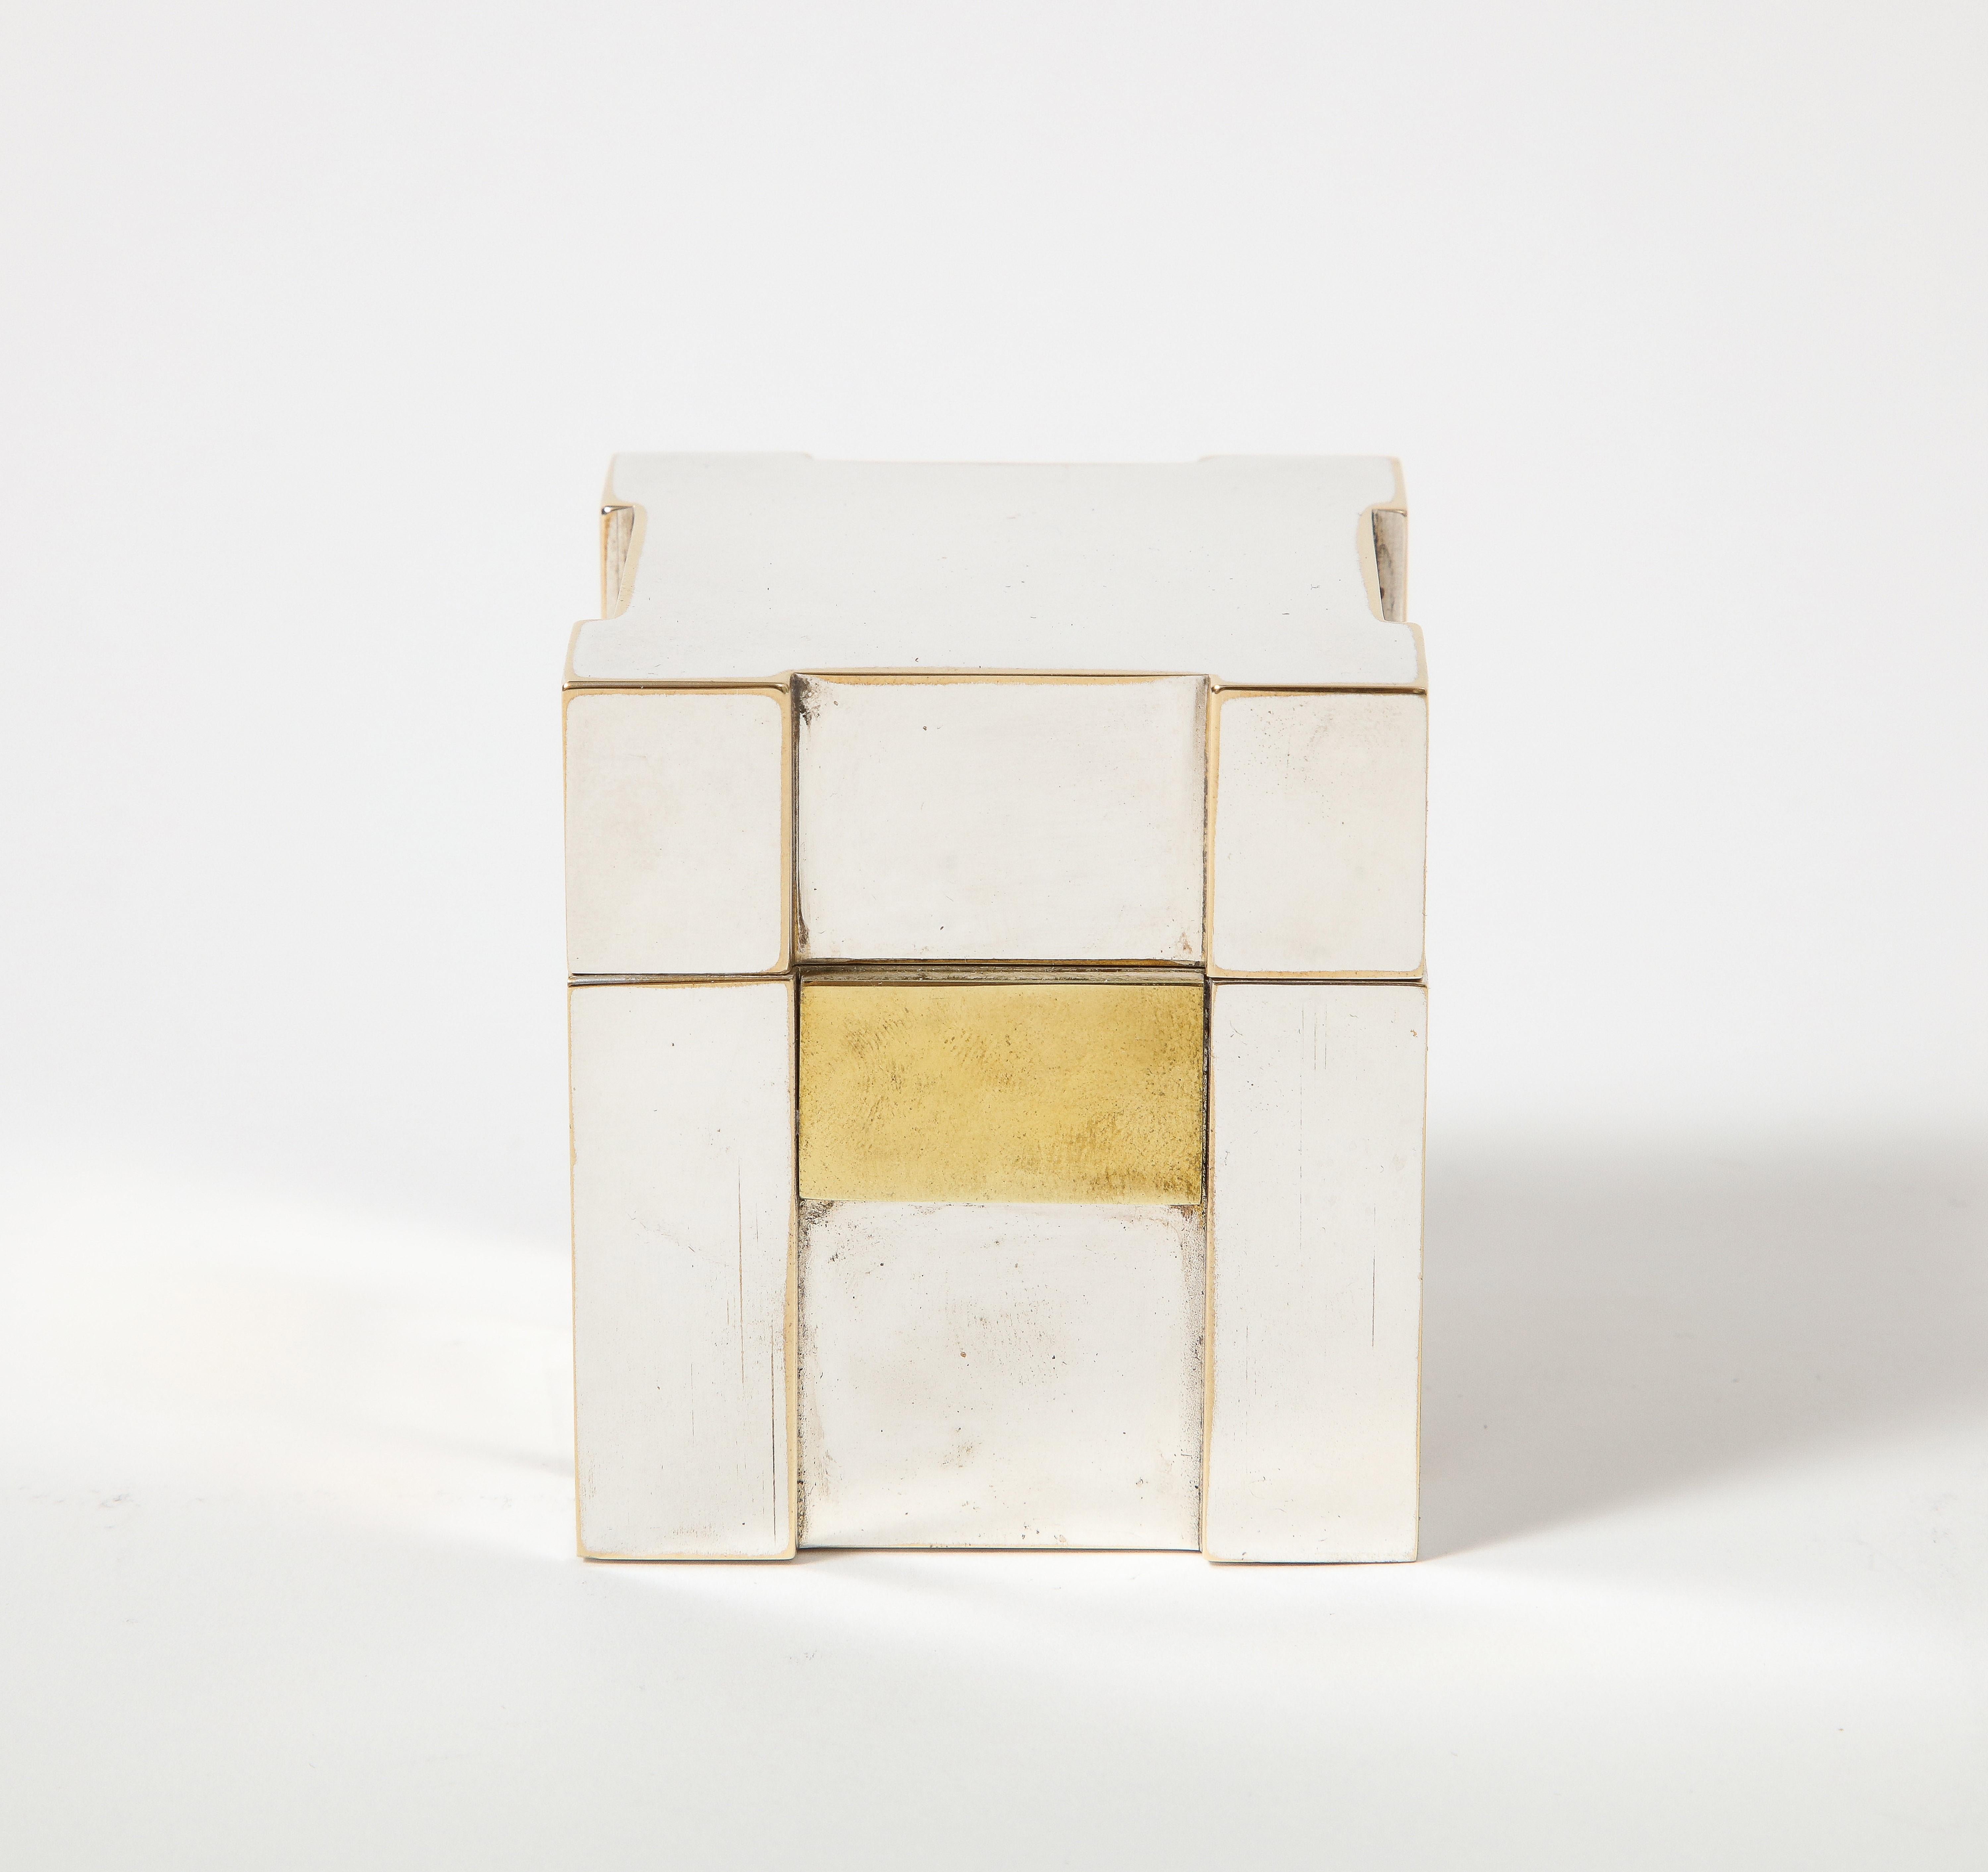 Italian Silver and Brass Lighter, Hermes, Italy, c. 1970 For Sale